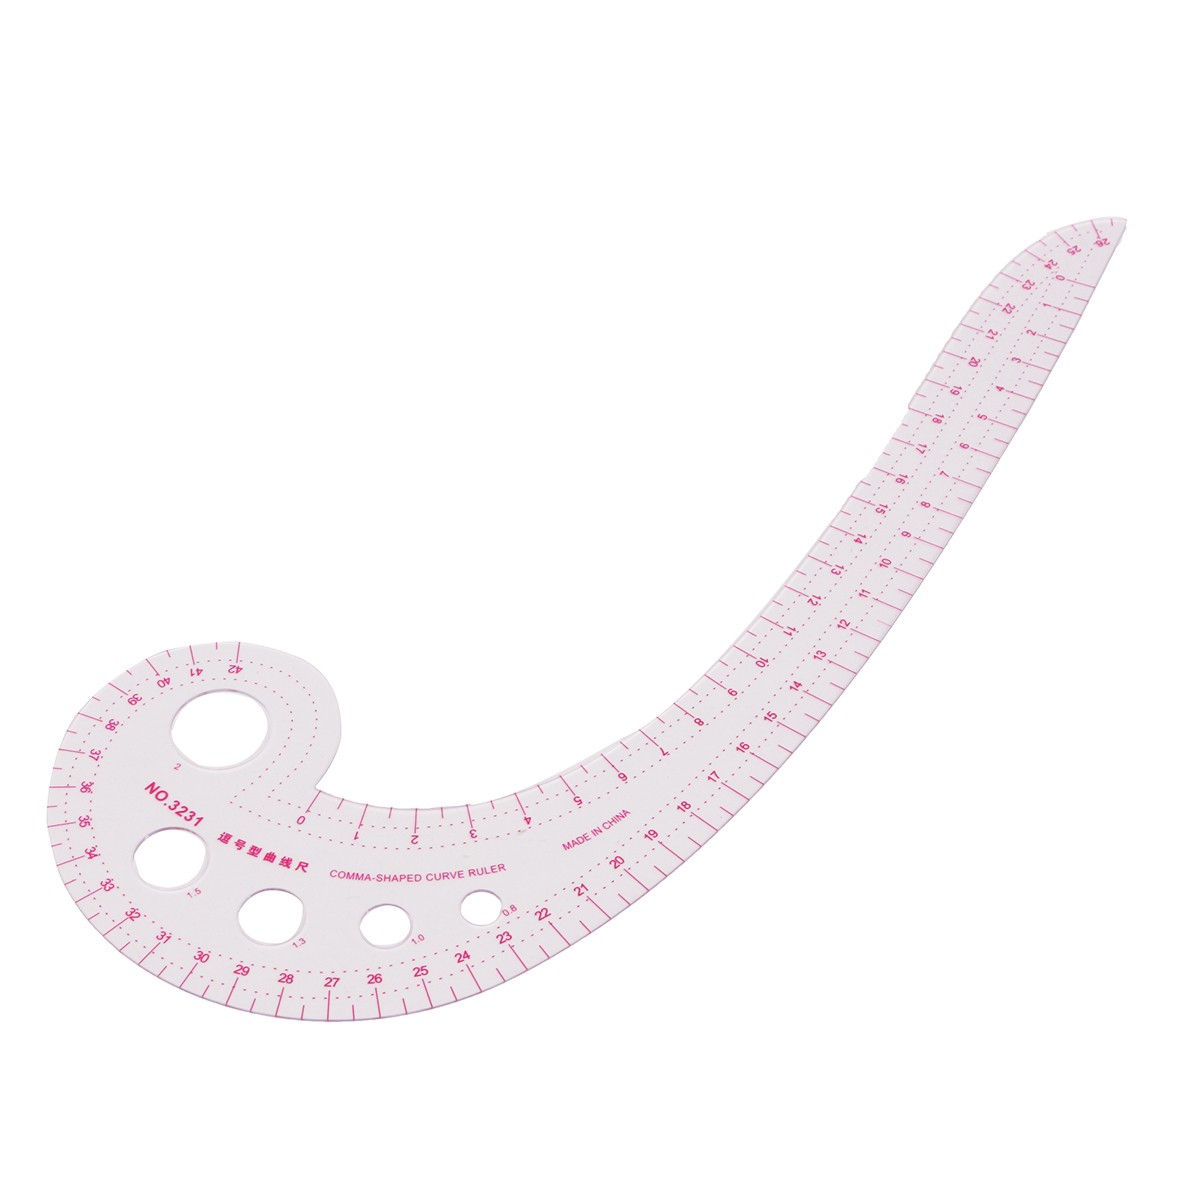 9-Style-French-Curve-Sewing-Tool-Sew-Drawing-Template-Ruler-Kit-for-Dressmaking-Tailoring-Designing-1362523